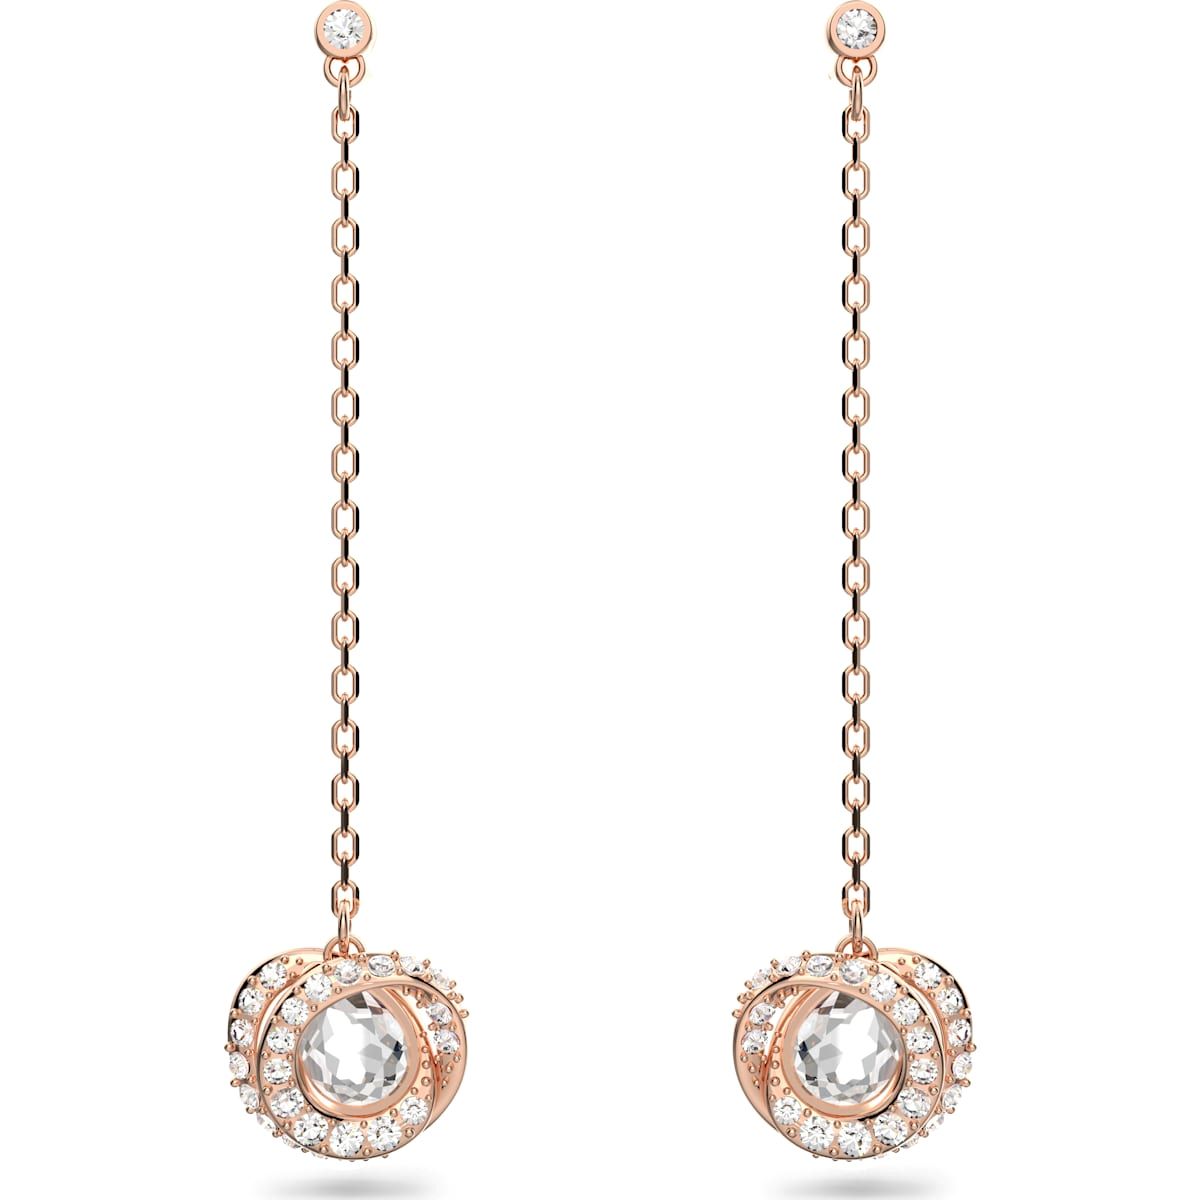 Swarovski Generation Rose Gold Tone Plated White Crystal Spiral Drop Earrings